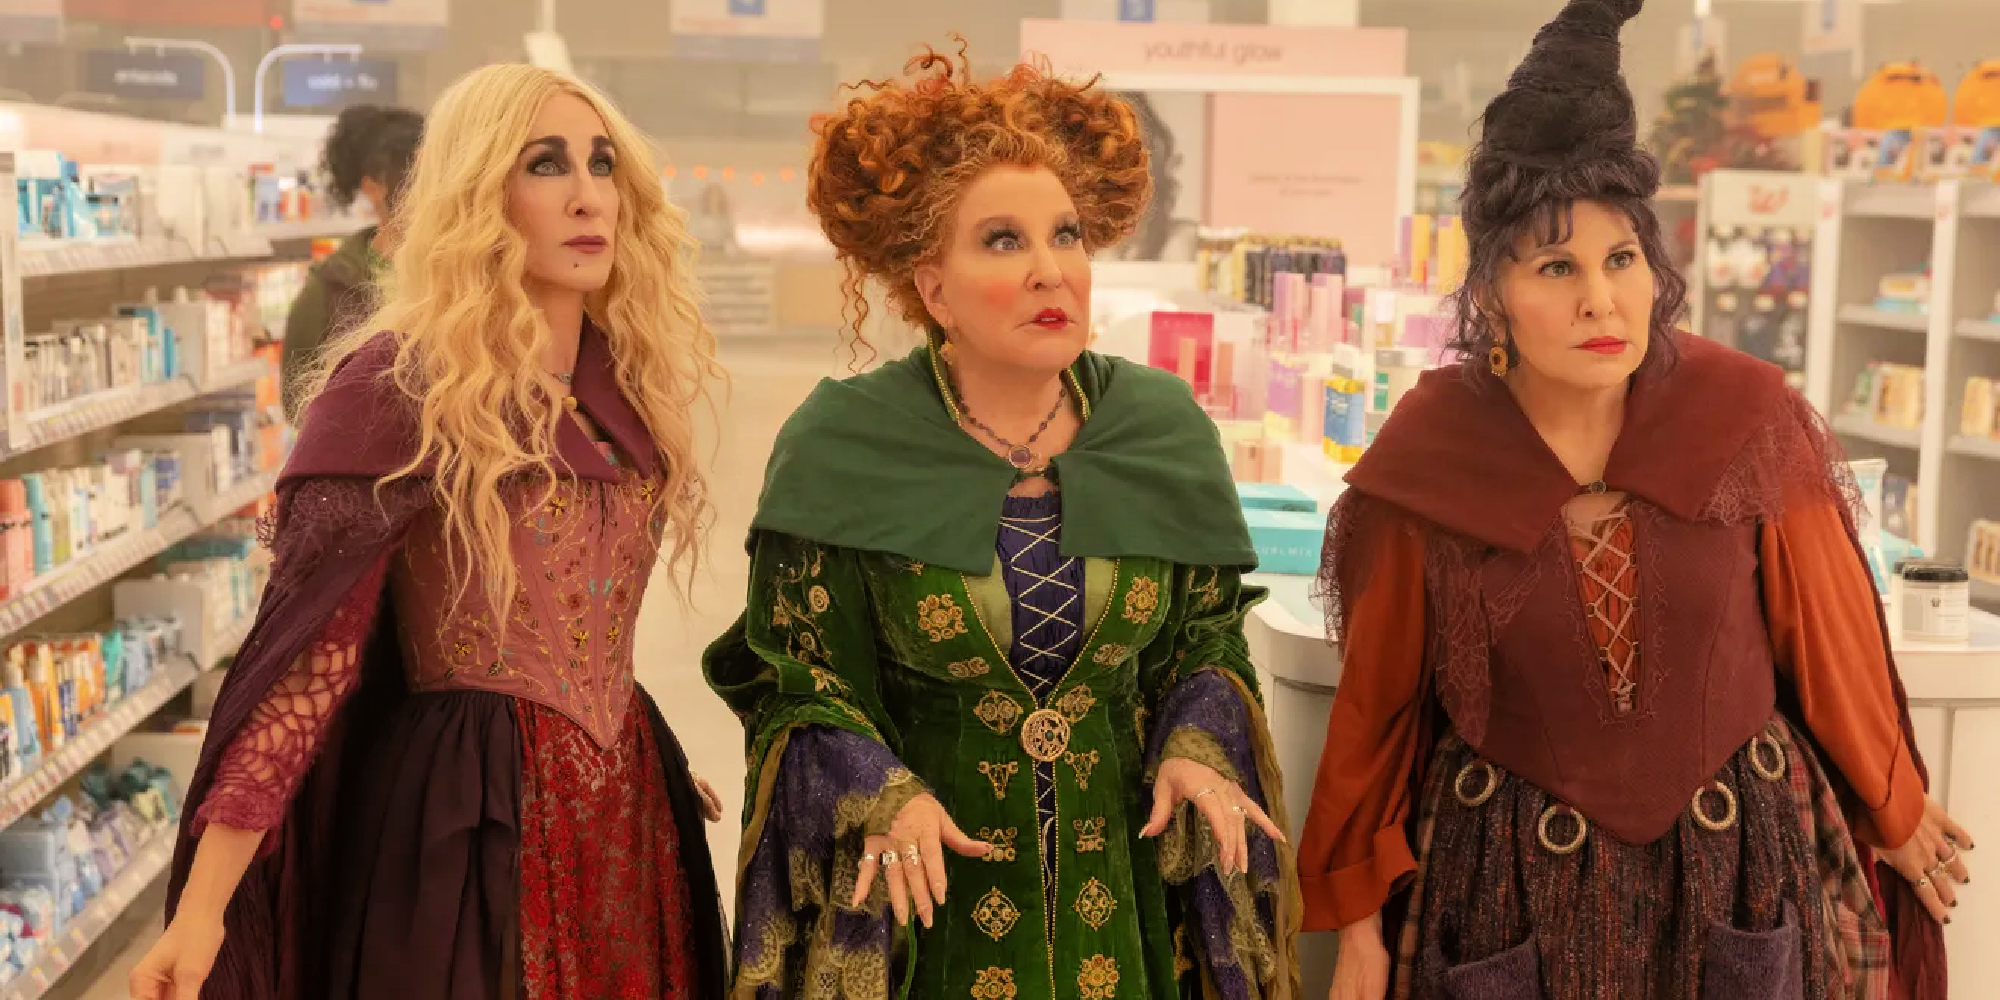 Sanderson Sisters Look Out Of Place At Walgreens In Hocus Pocus 2 Image